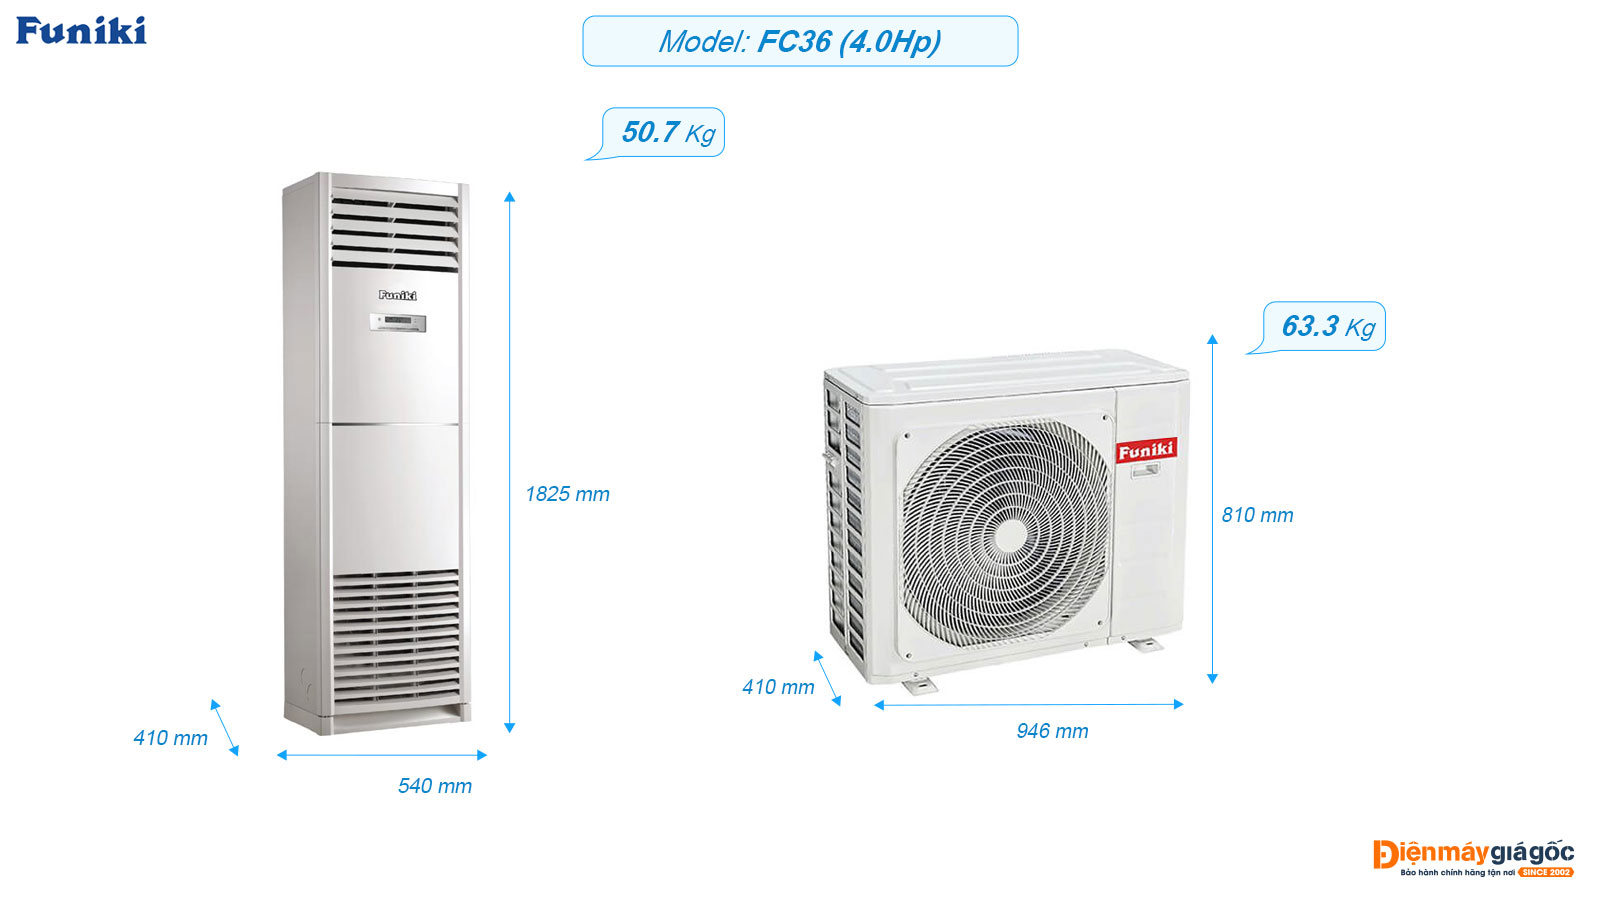 Funiki floor standing air conditioning FC36 (4.0Hp)